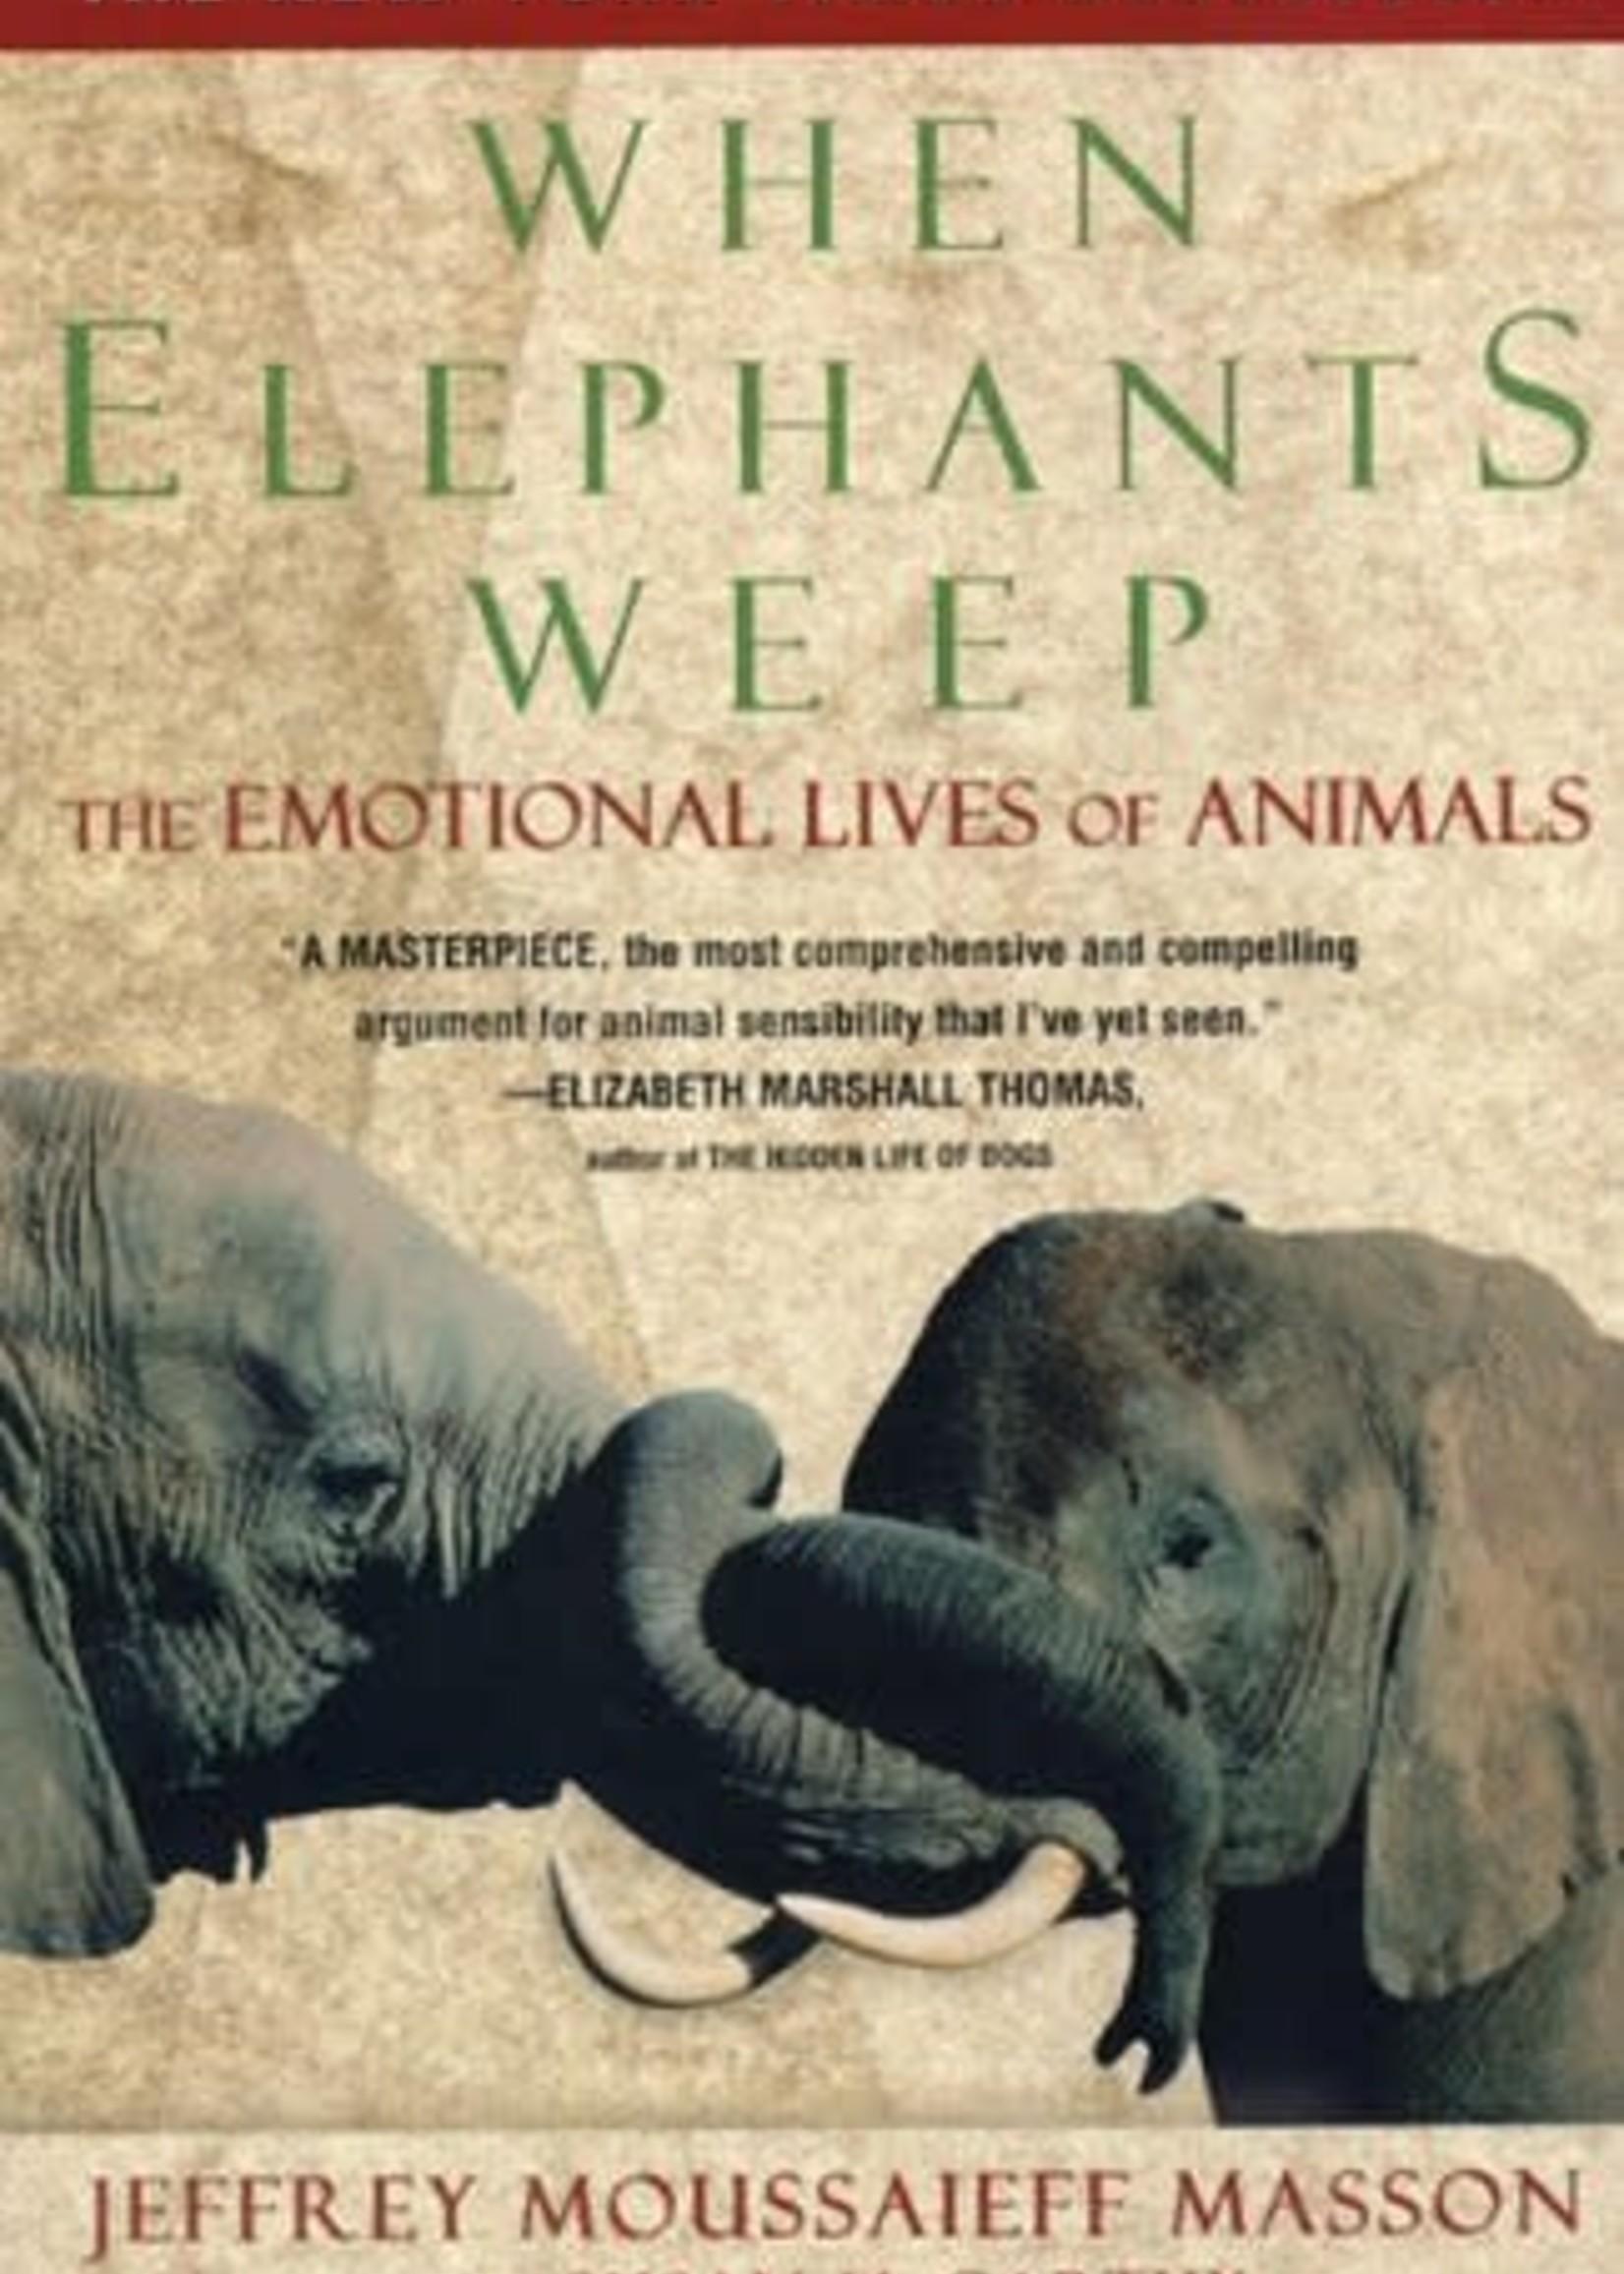 When Elephants Weep: The Emotional Lives of Animals by Jeffrey Moussaieff Masson, Susan McCarthy